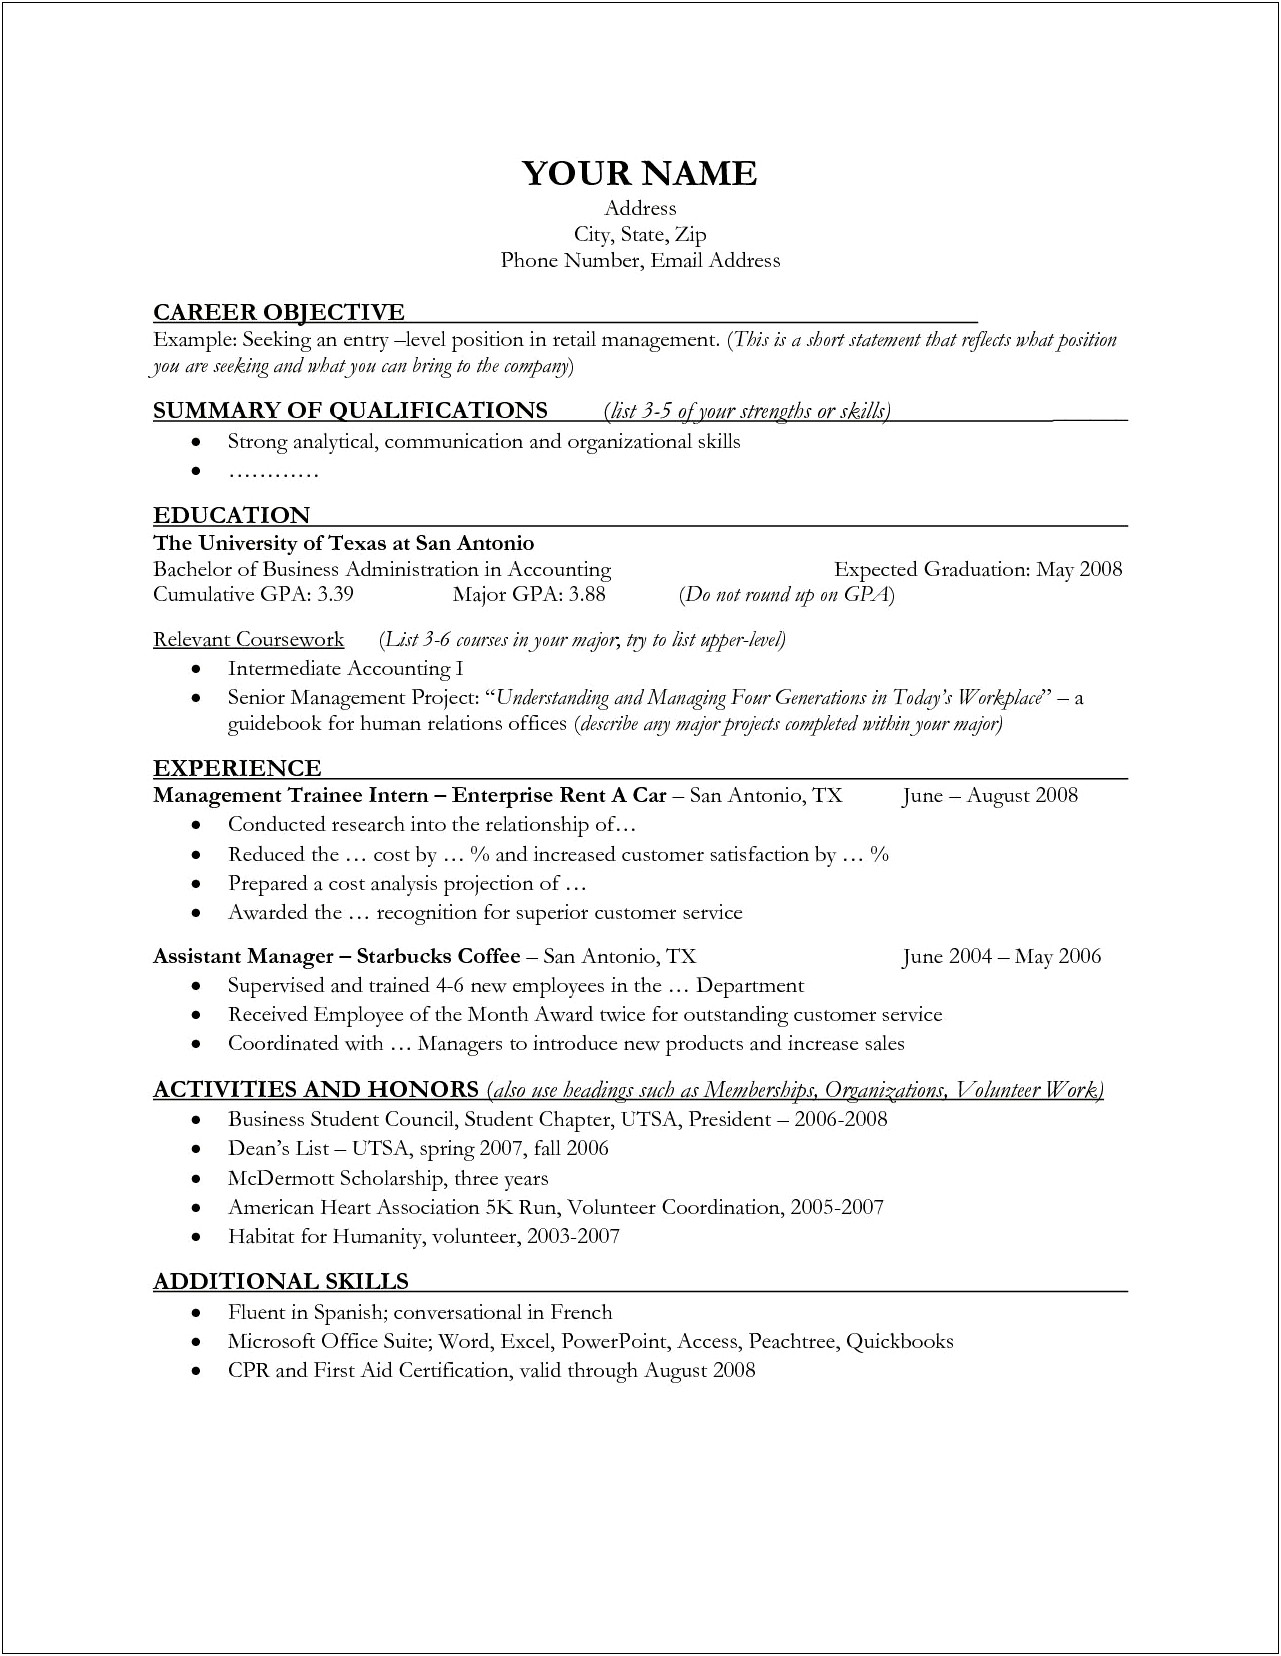 Resume Objective Example For Job